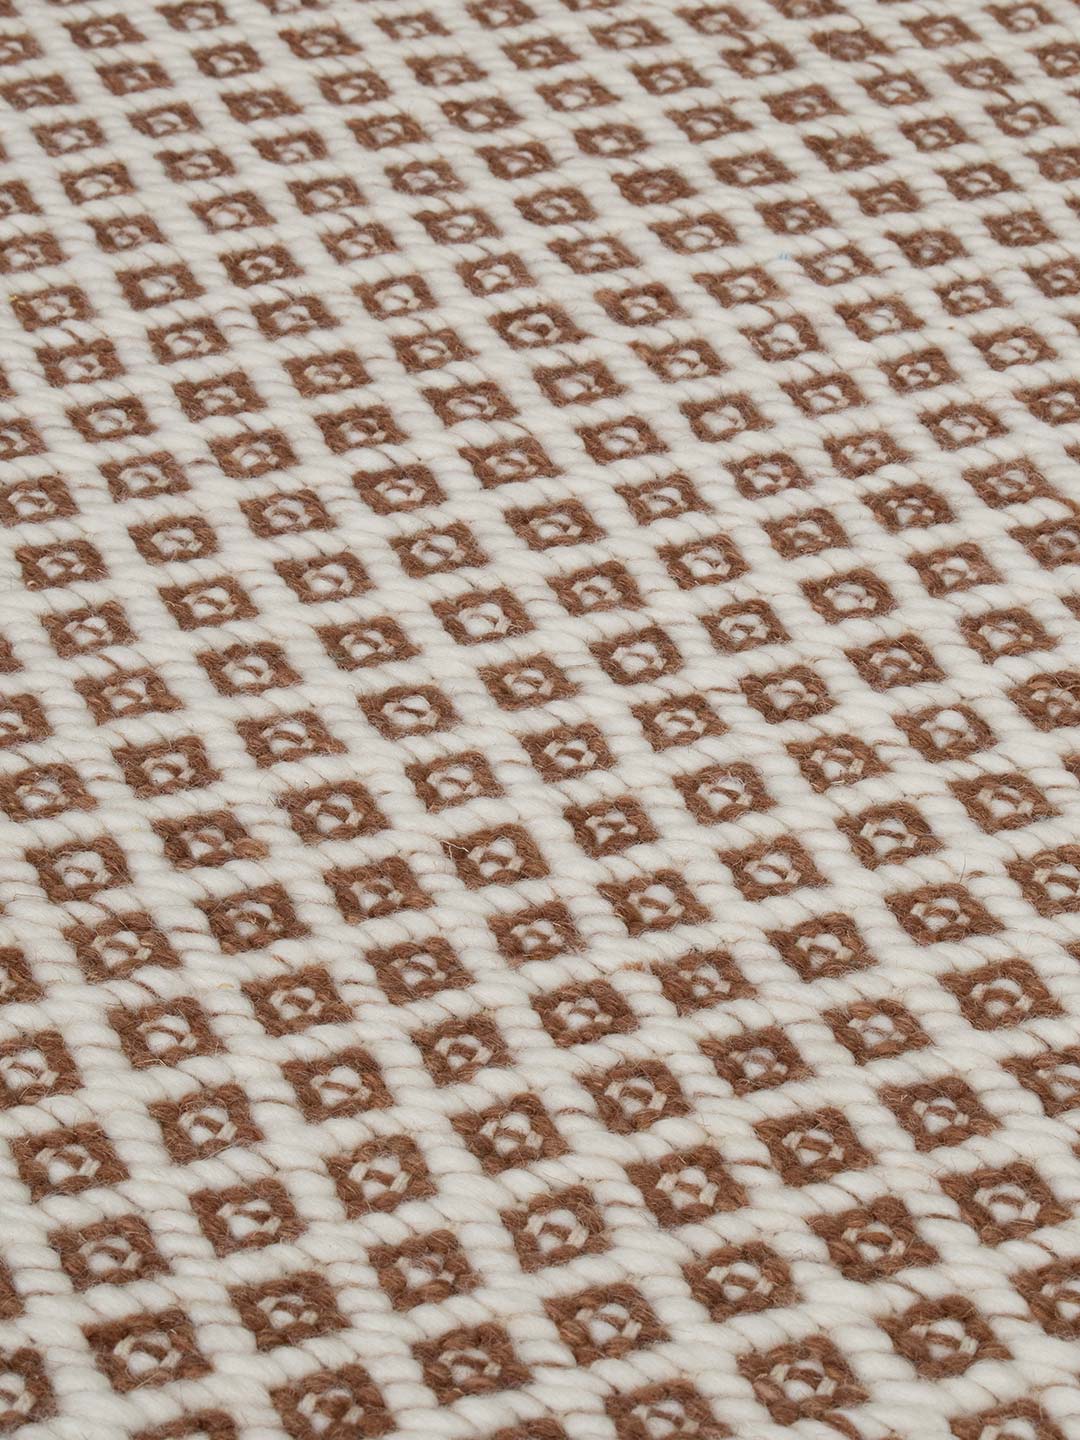 Rubick Rust Ivory Rug 20% off from the Rug Collection Stockist Make Your House A Home, Furniture Store Bendigo. Free Australia Wide Delivery